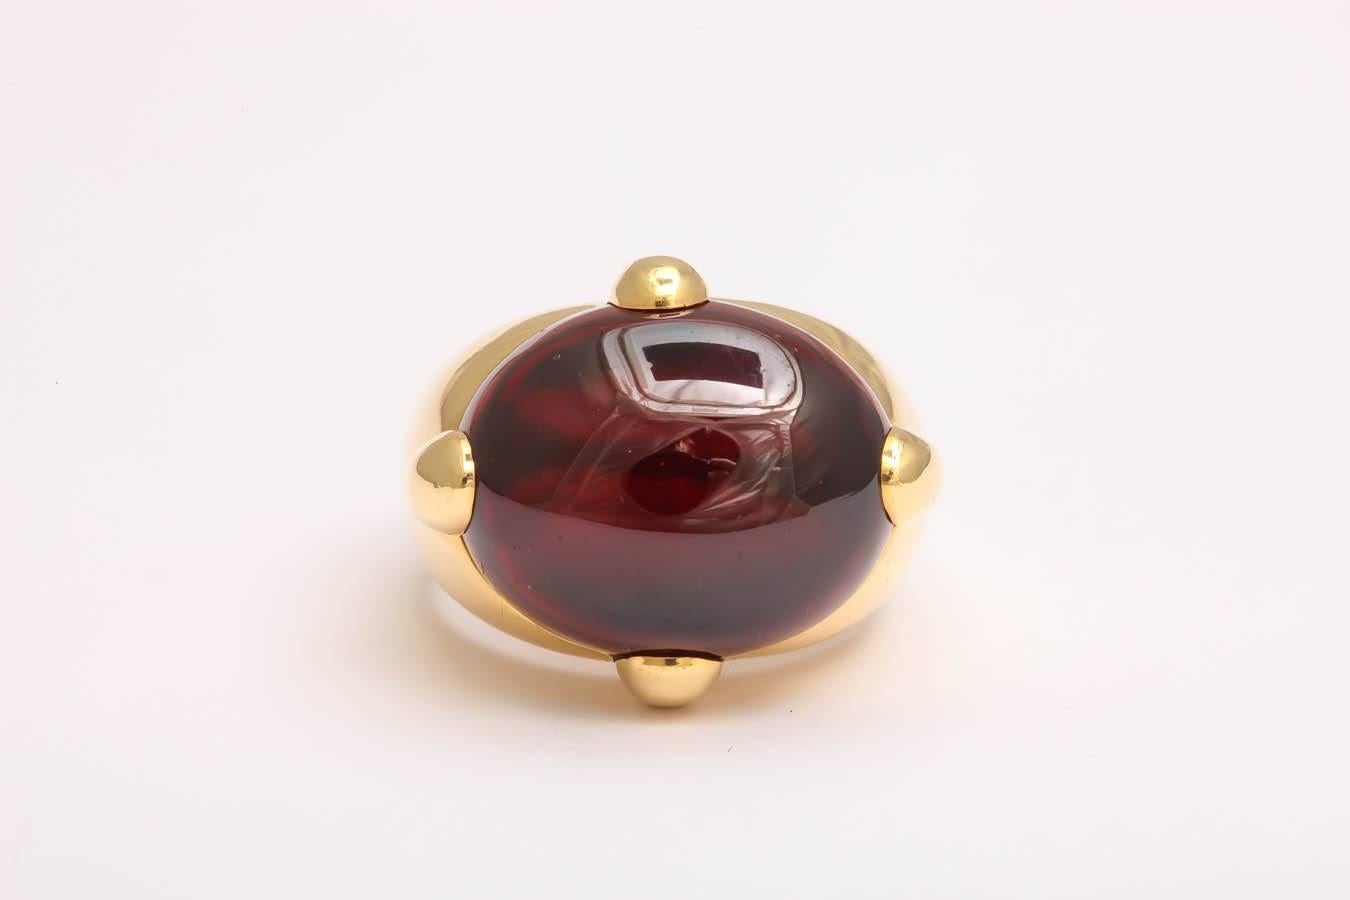 18kt yellow gold high style large cabochon garnet ring centering a 20 carat cabochon garnet which is set in a super strong and thick four prong setting for extra security and beautiful design effect. Signed by Pomellato Italy designed in the 1980's